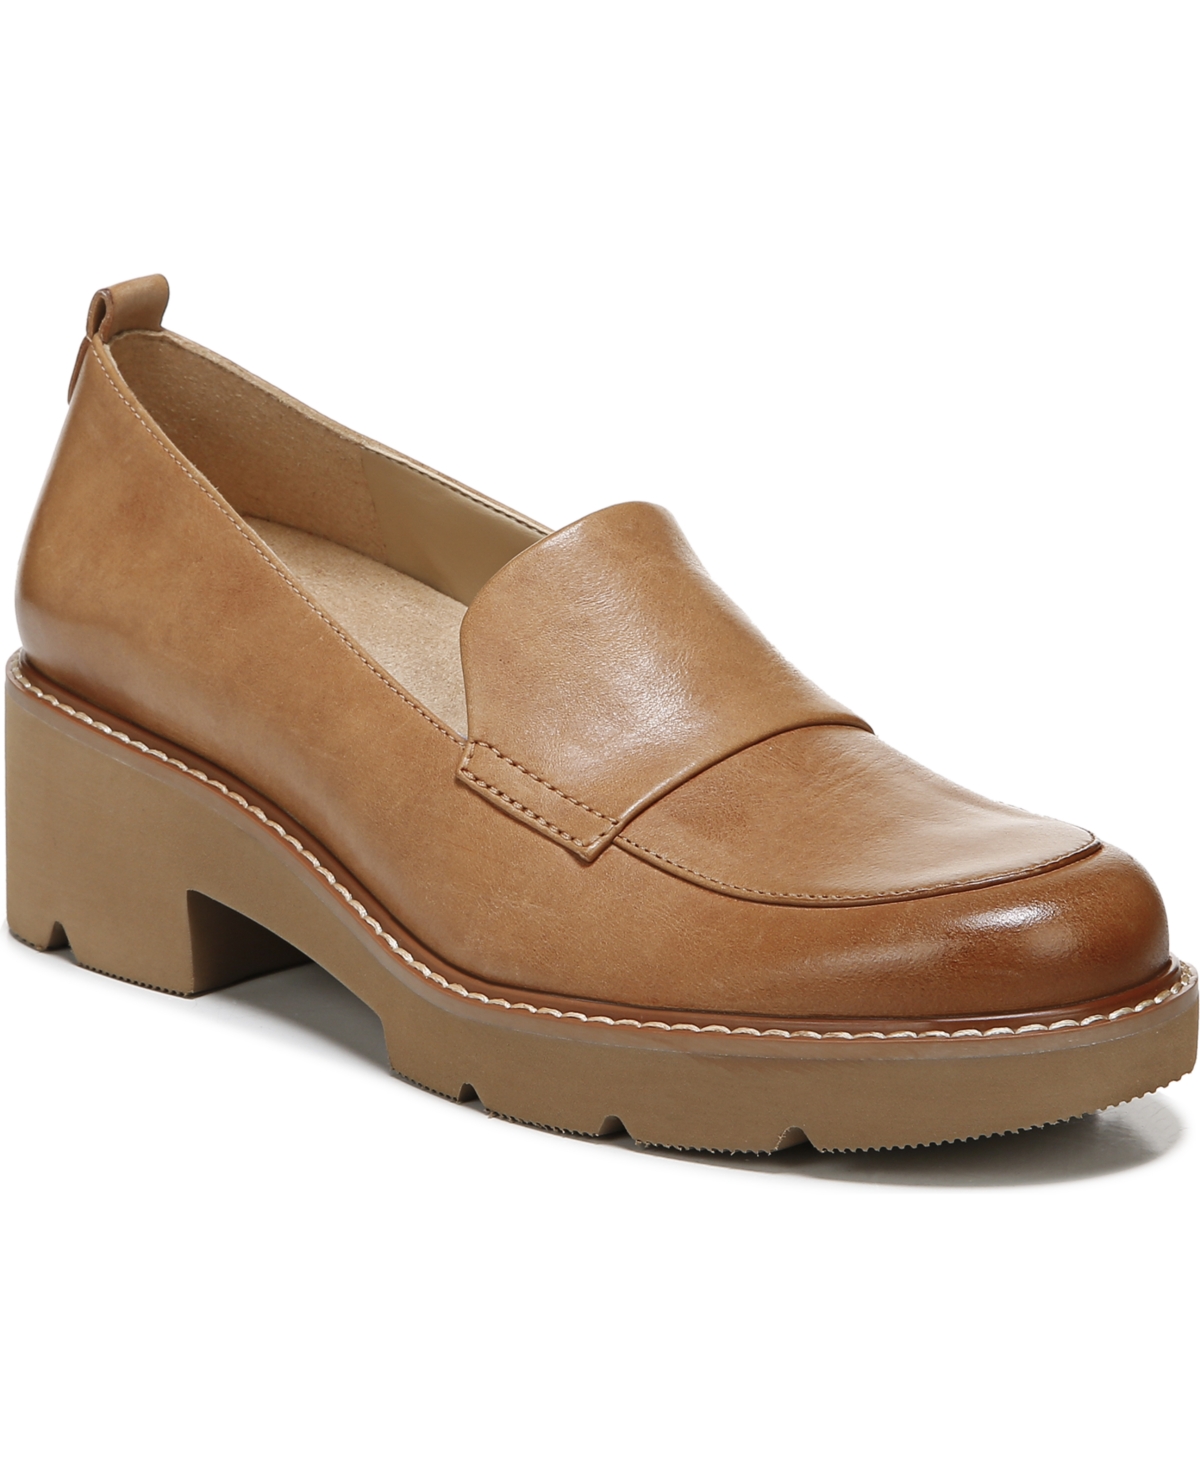 NATURALIZER DARRY LUG SOLE LOAFERS